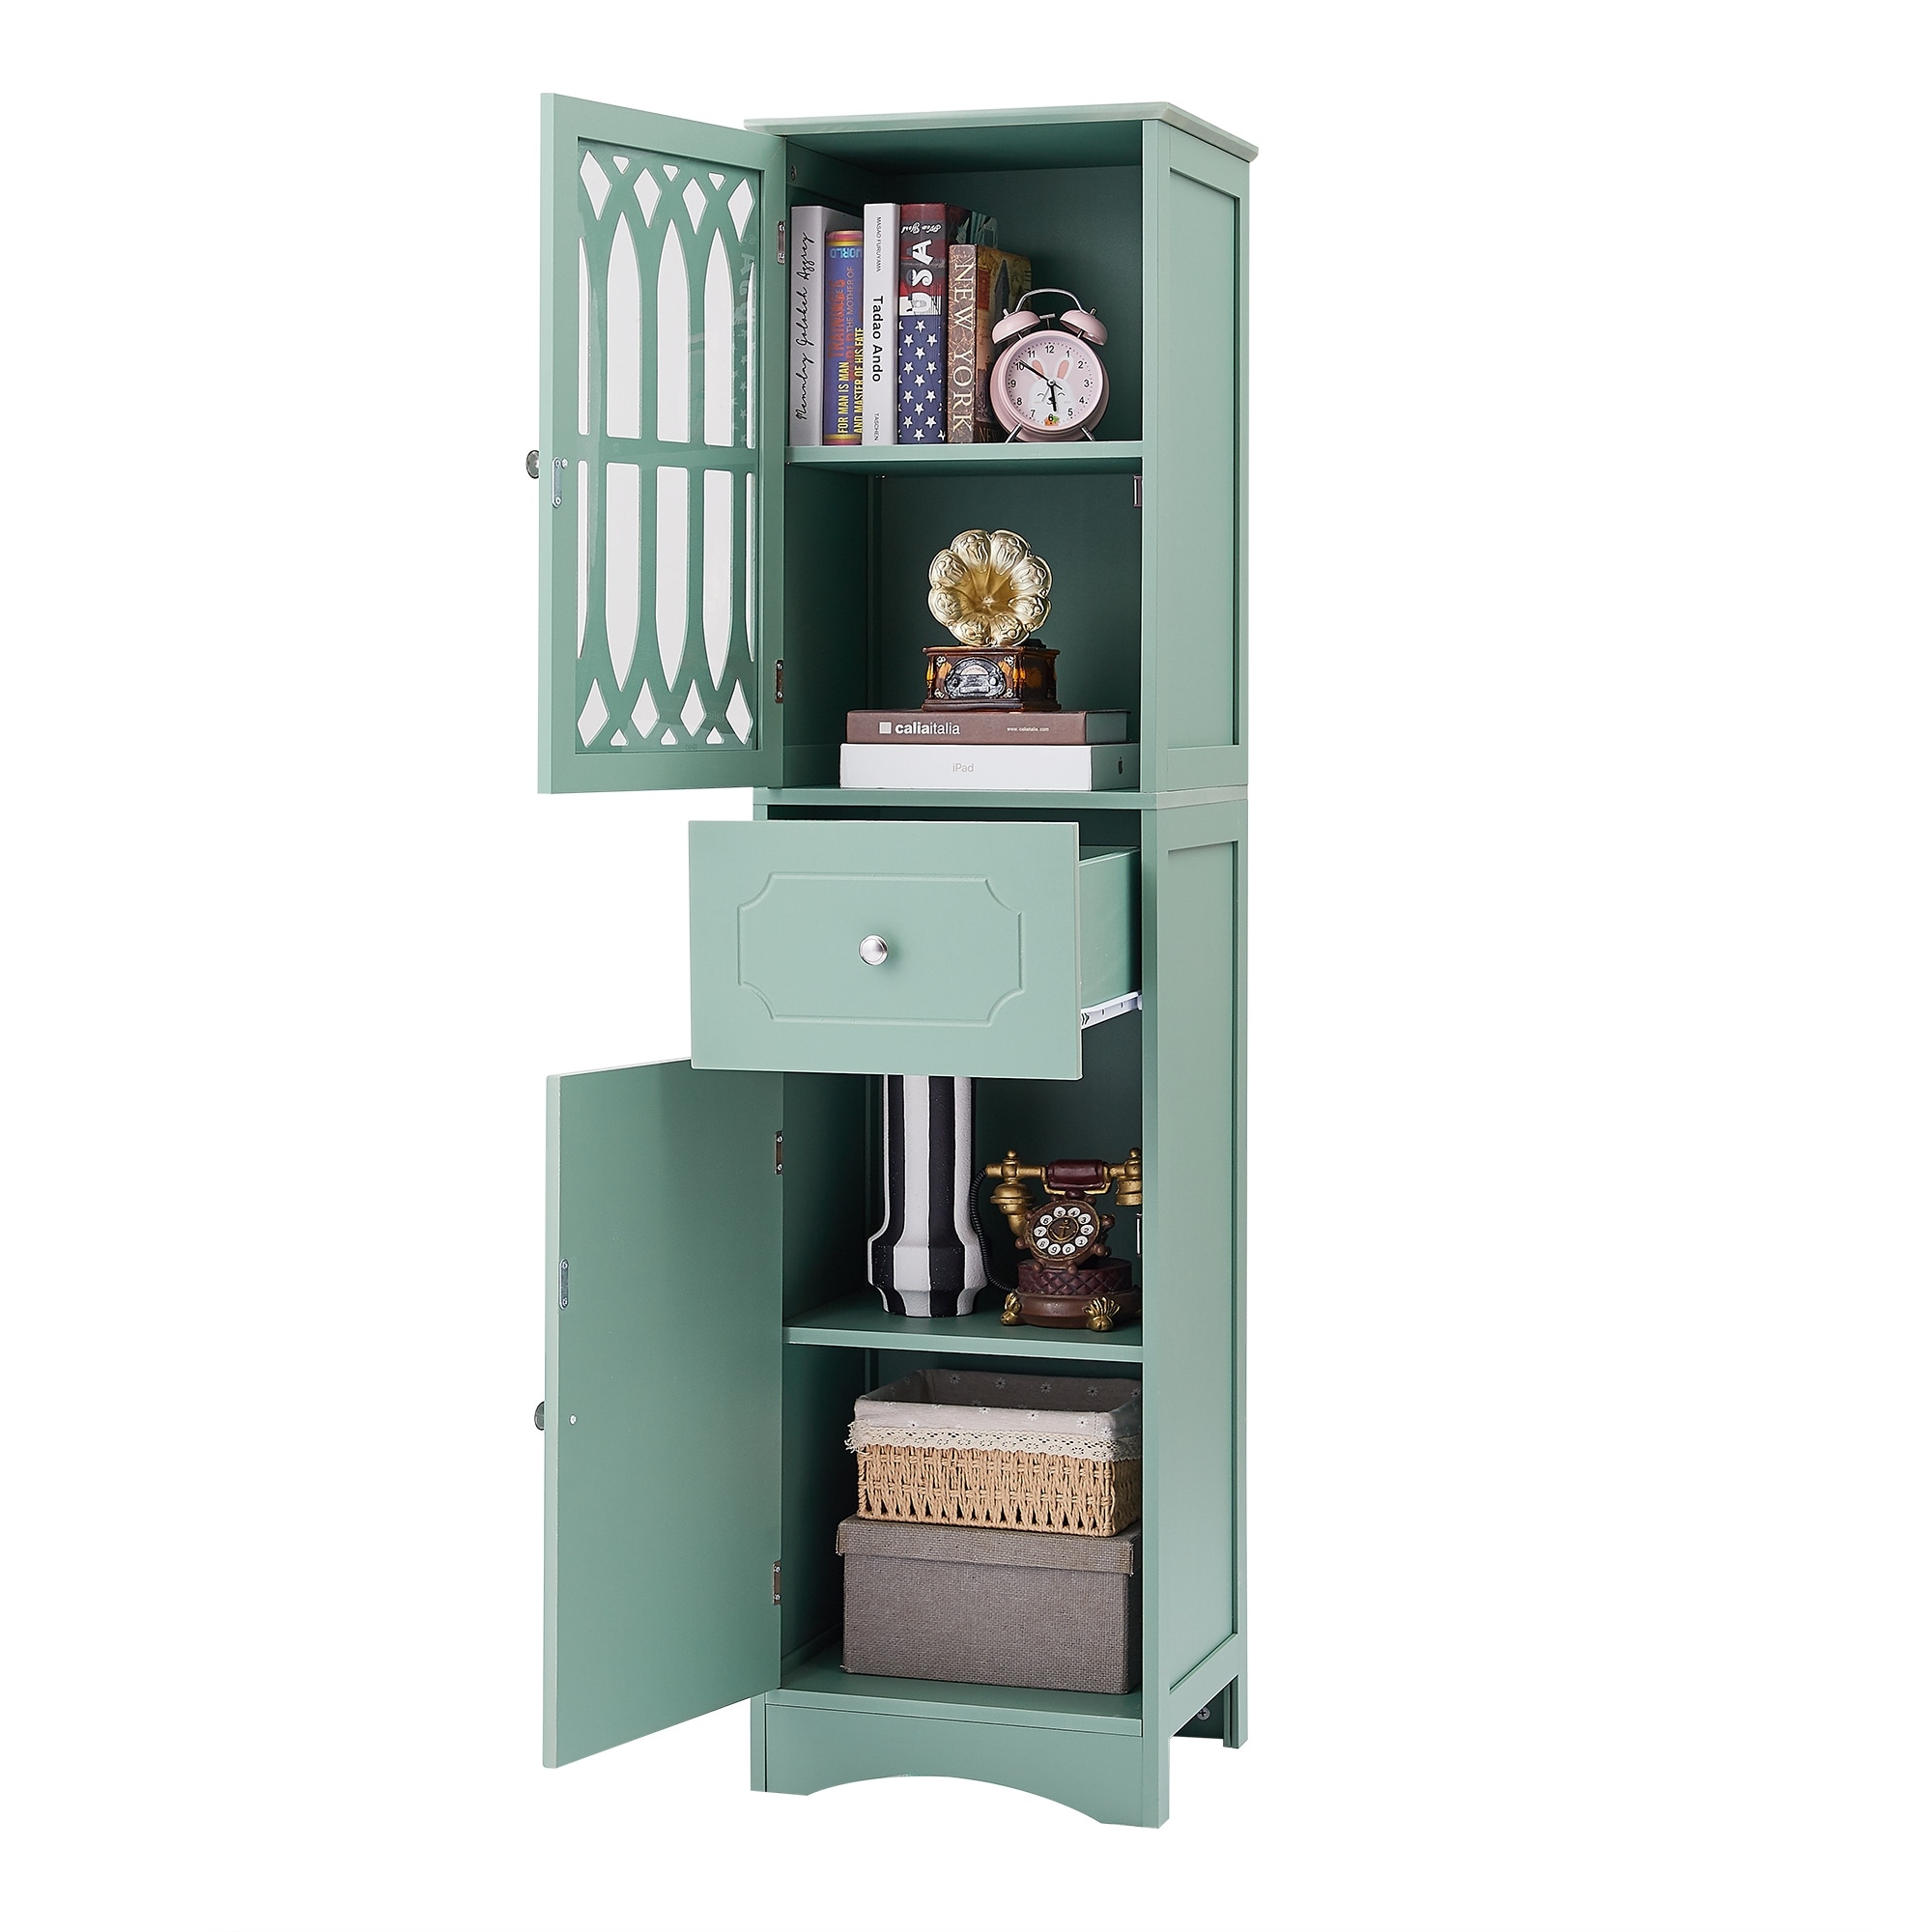 https://ak1.ostkcdn.com/images/products/is/images/direct/047e9c21413ce9591de921f6204ebb4d7d76e220/Tall-Bathroom-Cabinet%2C-Freestanding-Storage-Cabinet-with-Drawer-and-2-Doors%2C-Mid-Century-Modern-Cabinet-with-Adjustable-Shelf.jpg